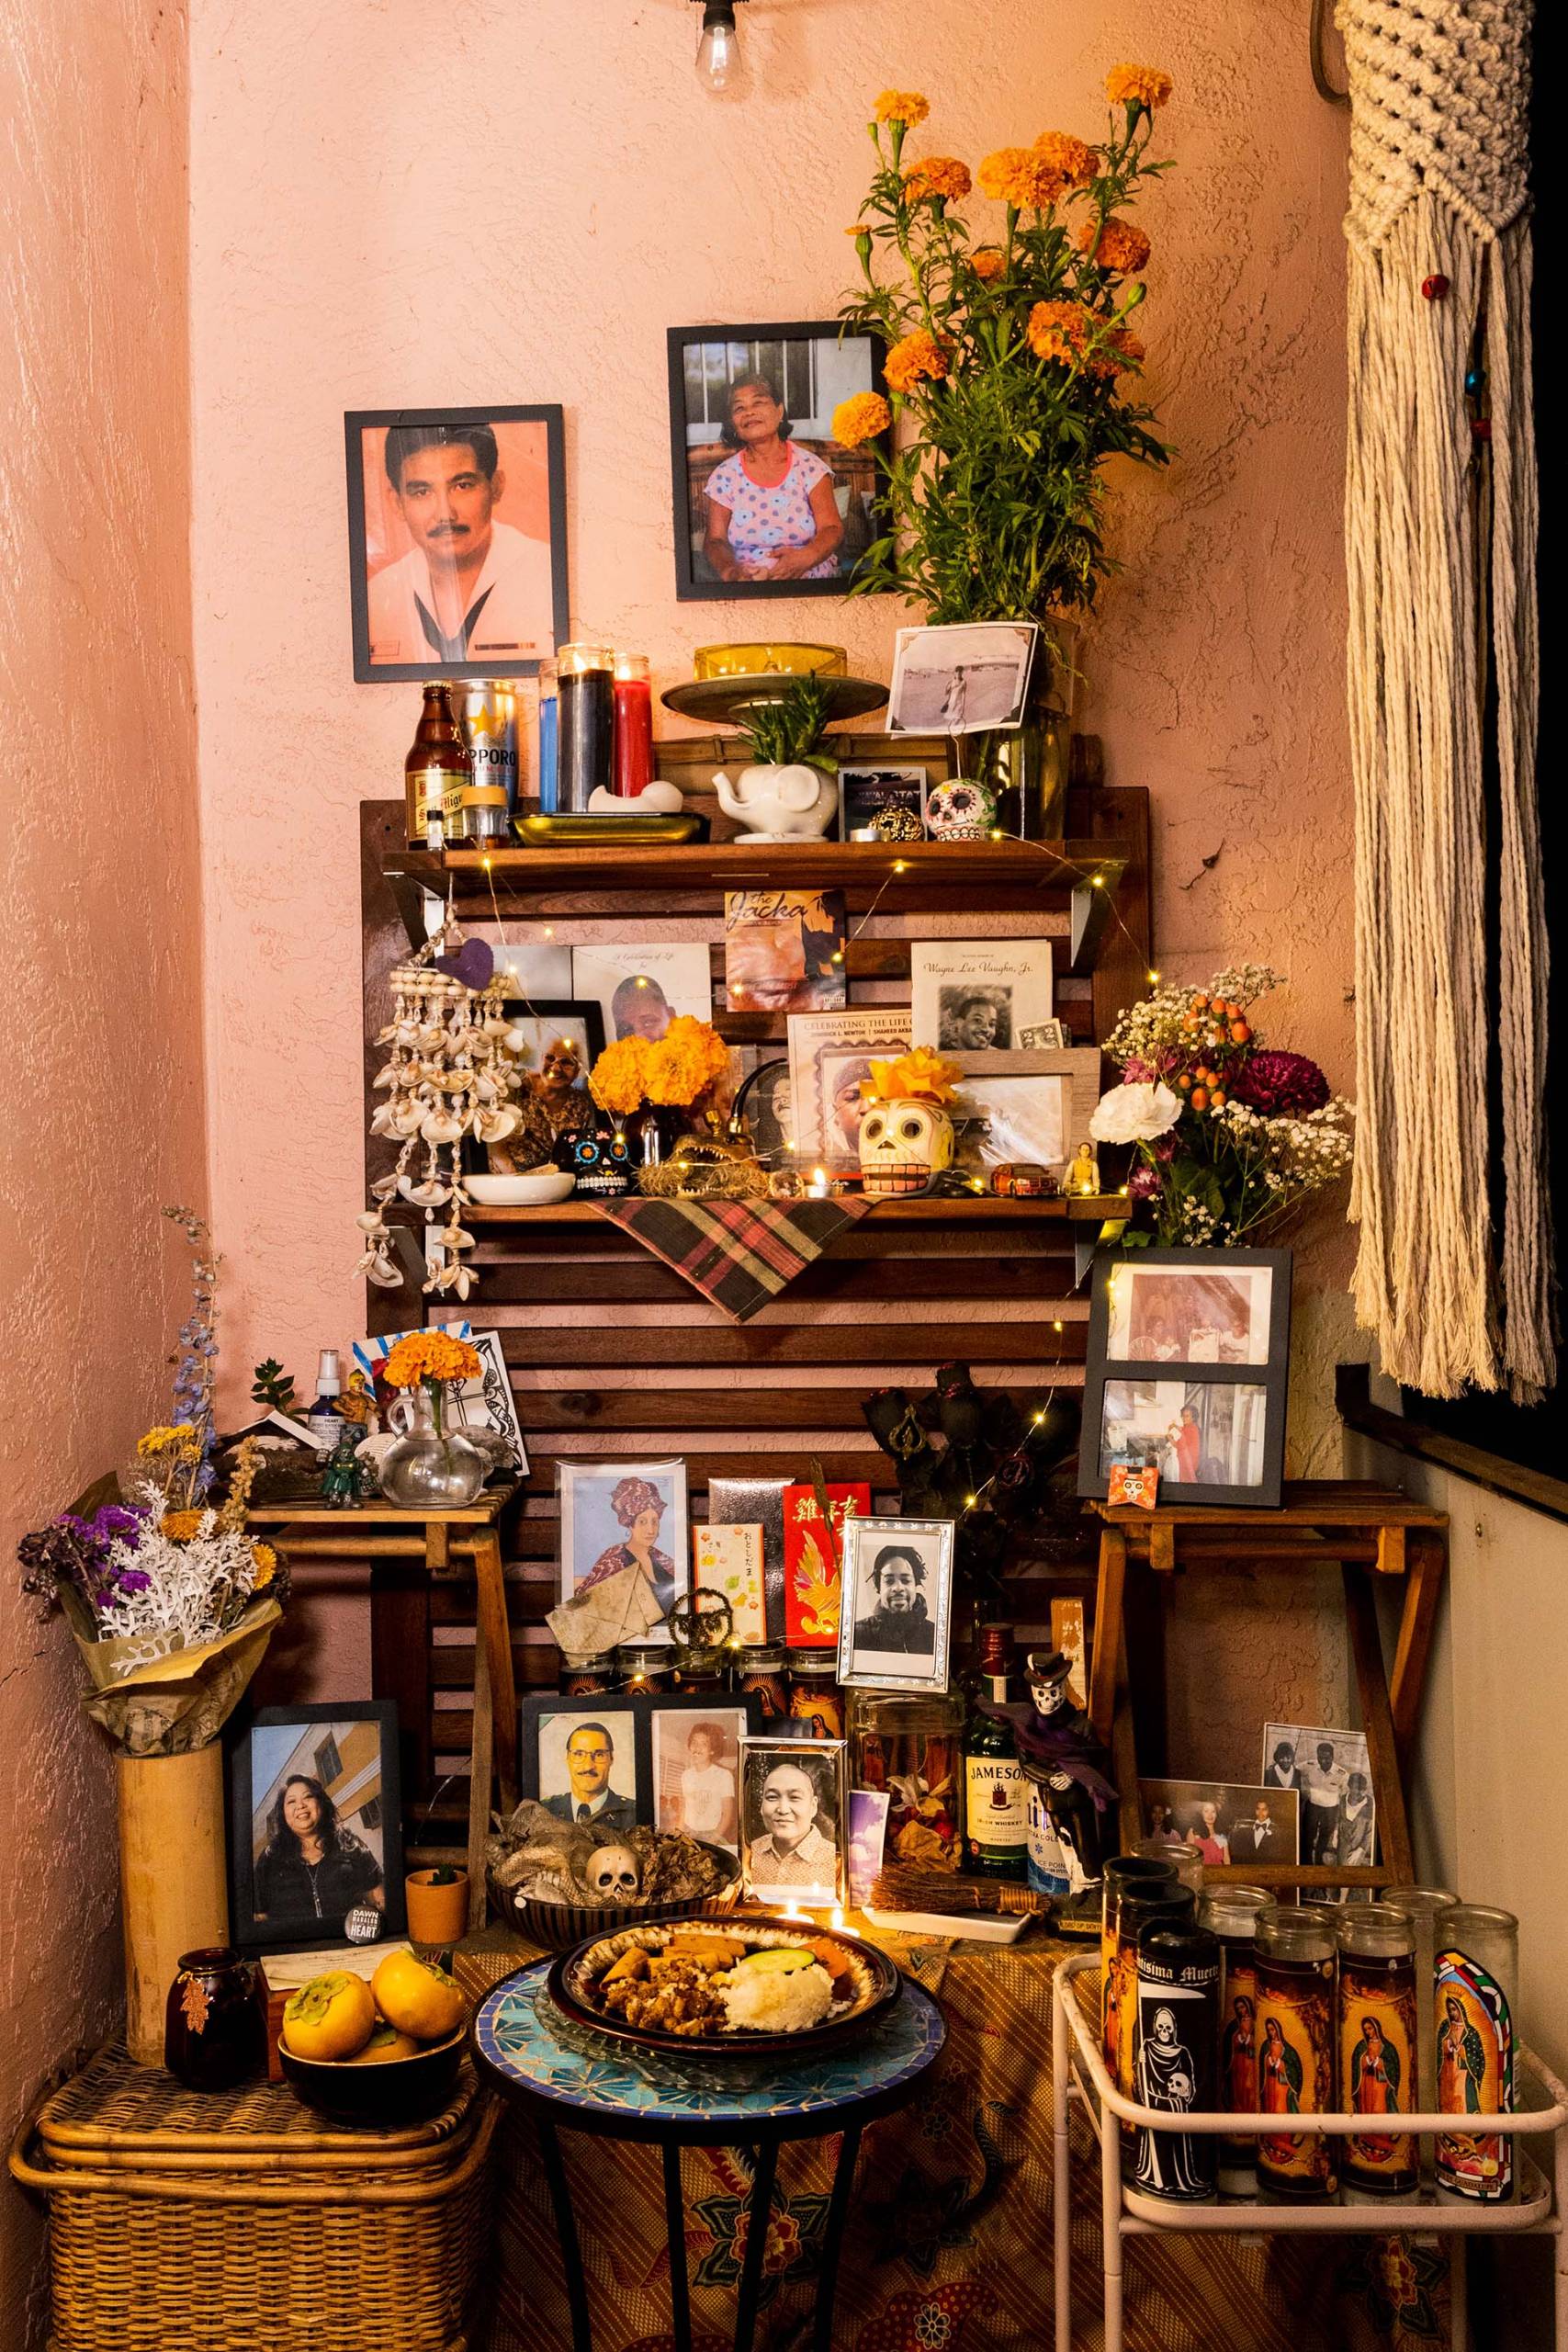 A home altar to honor ancestors, covered with framed photographs, decorative skulls, and food offerings.